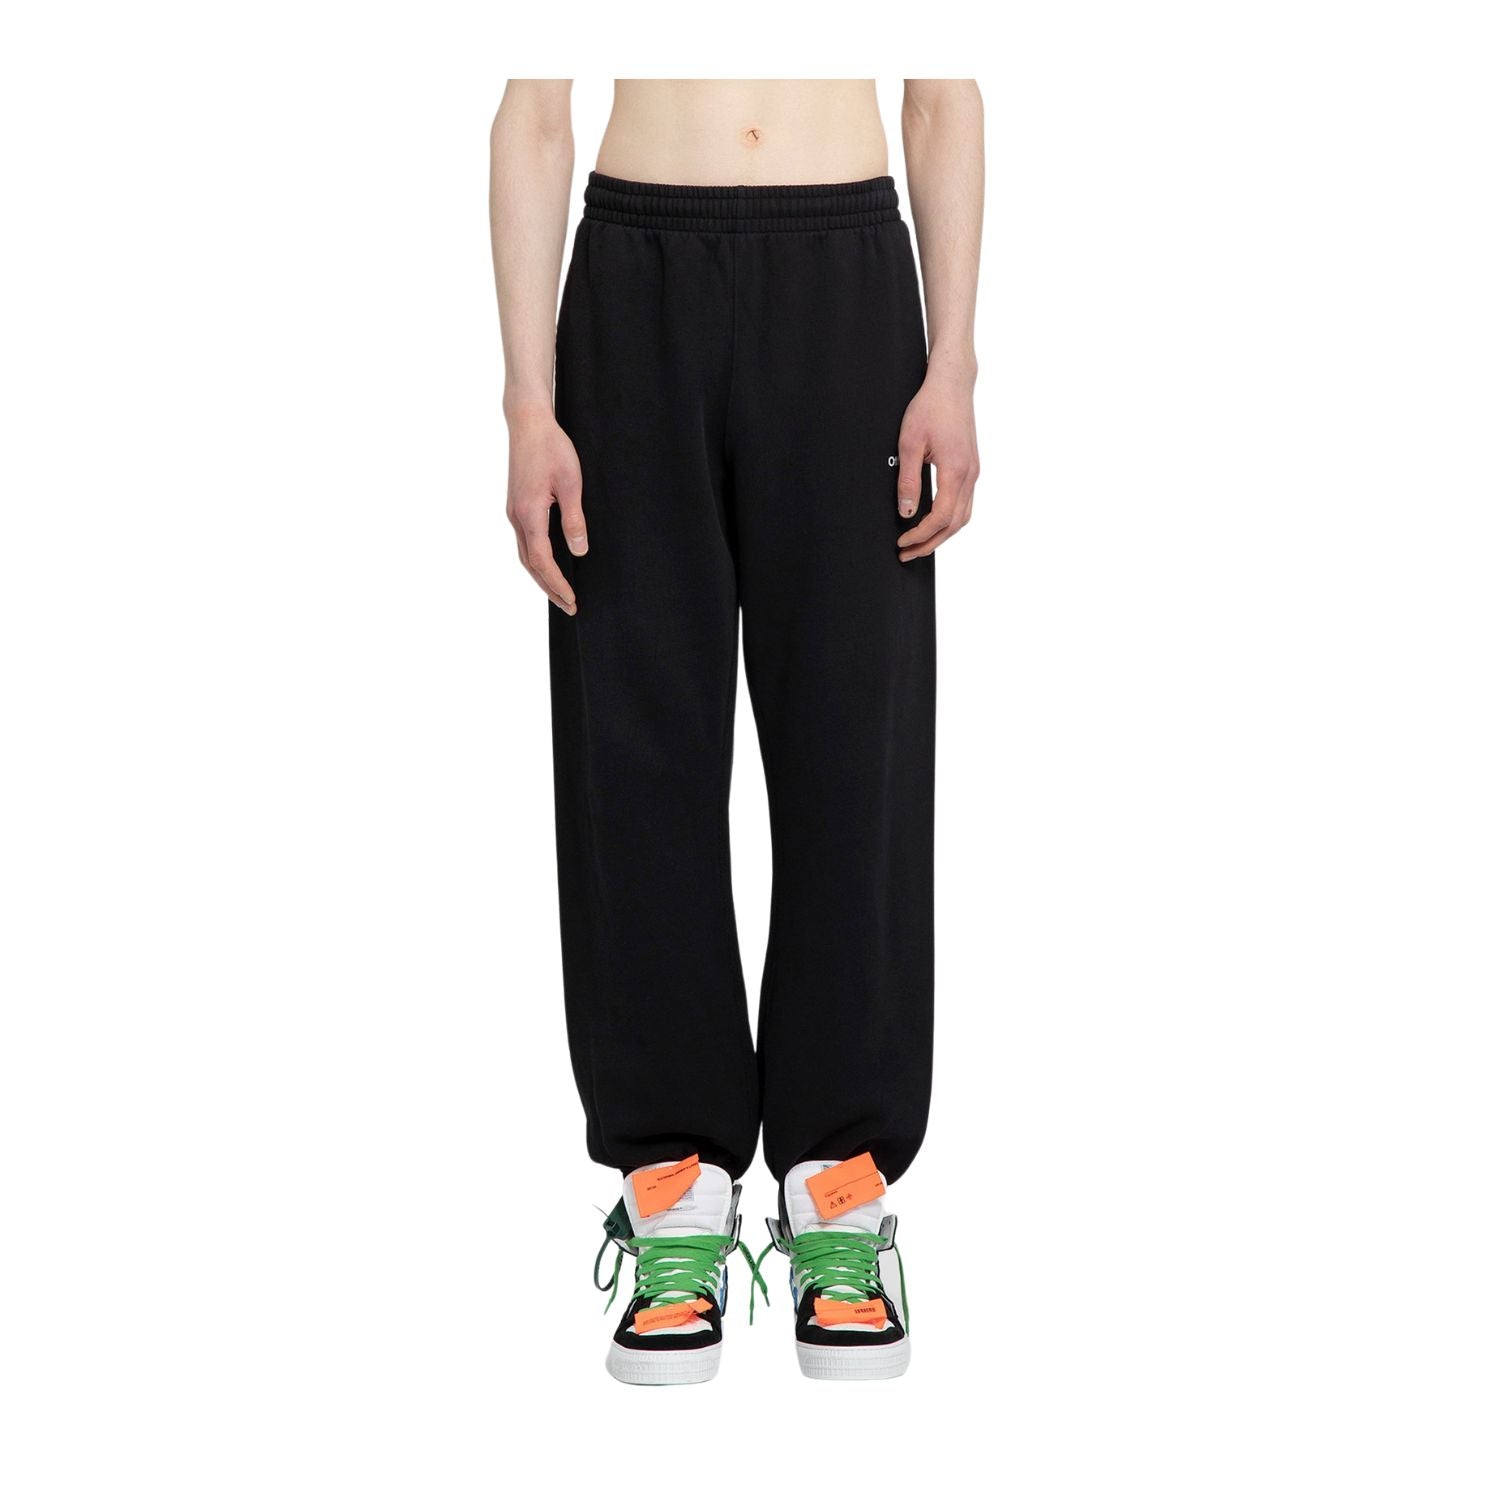 Off-white Diag Helvetica Slim Sweatpant Mens Style : Omch029c99fle00